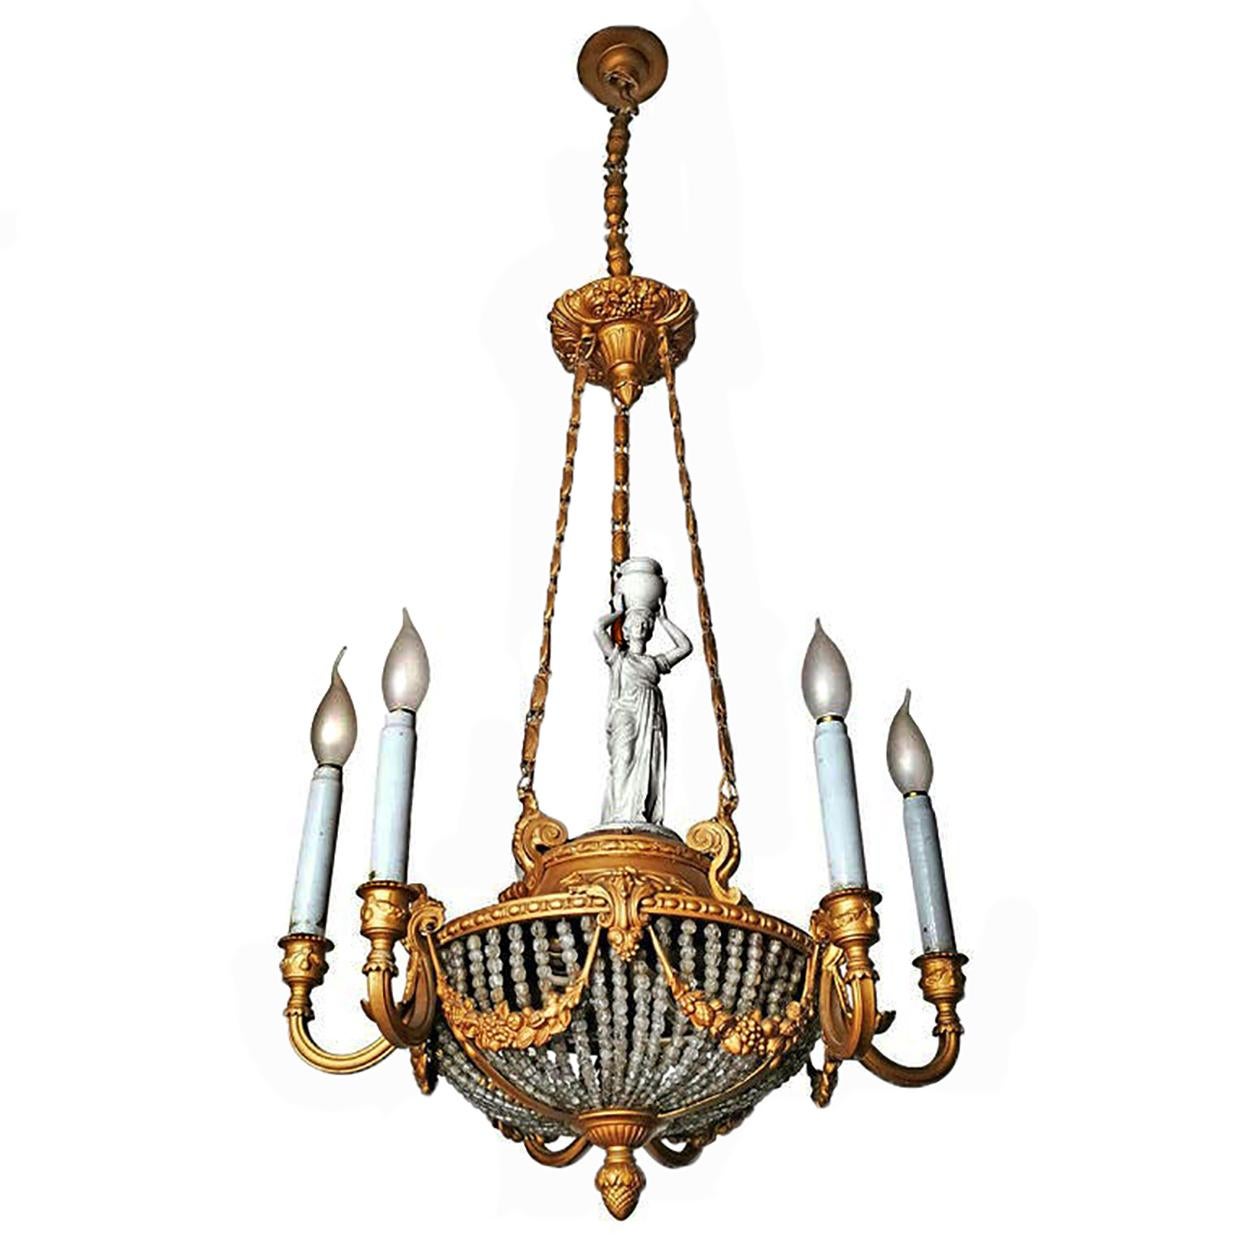 A wonderful gilt bronze and a beaded crystal basket, 8-light ceiling fixture decorated with fine ornaments and garlands, France, 19th century. Porcelain caryatid and opaline white glass candles.
Dimensions:
Height 53.15 in. (chain 15.8 in)/ 135 cm